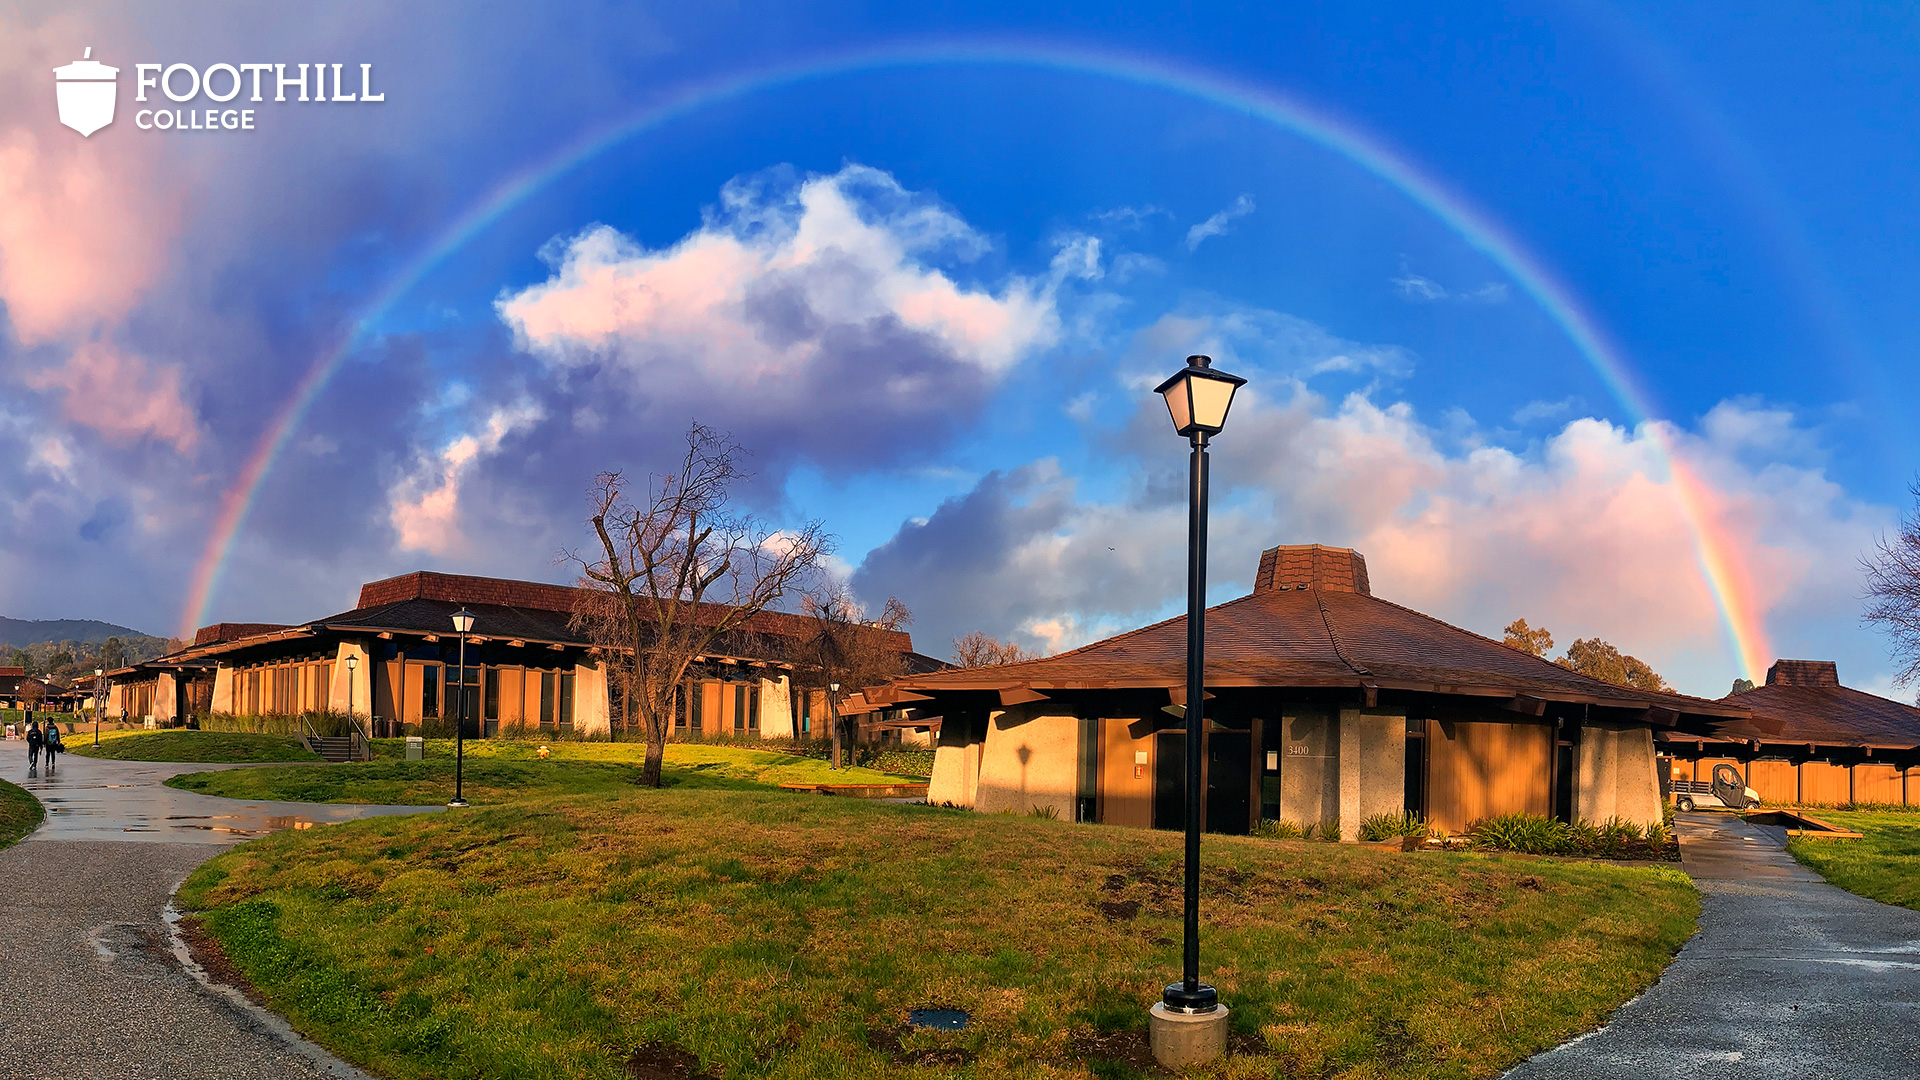 Rainbow over Foothill campus